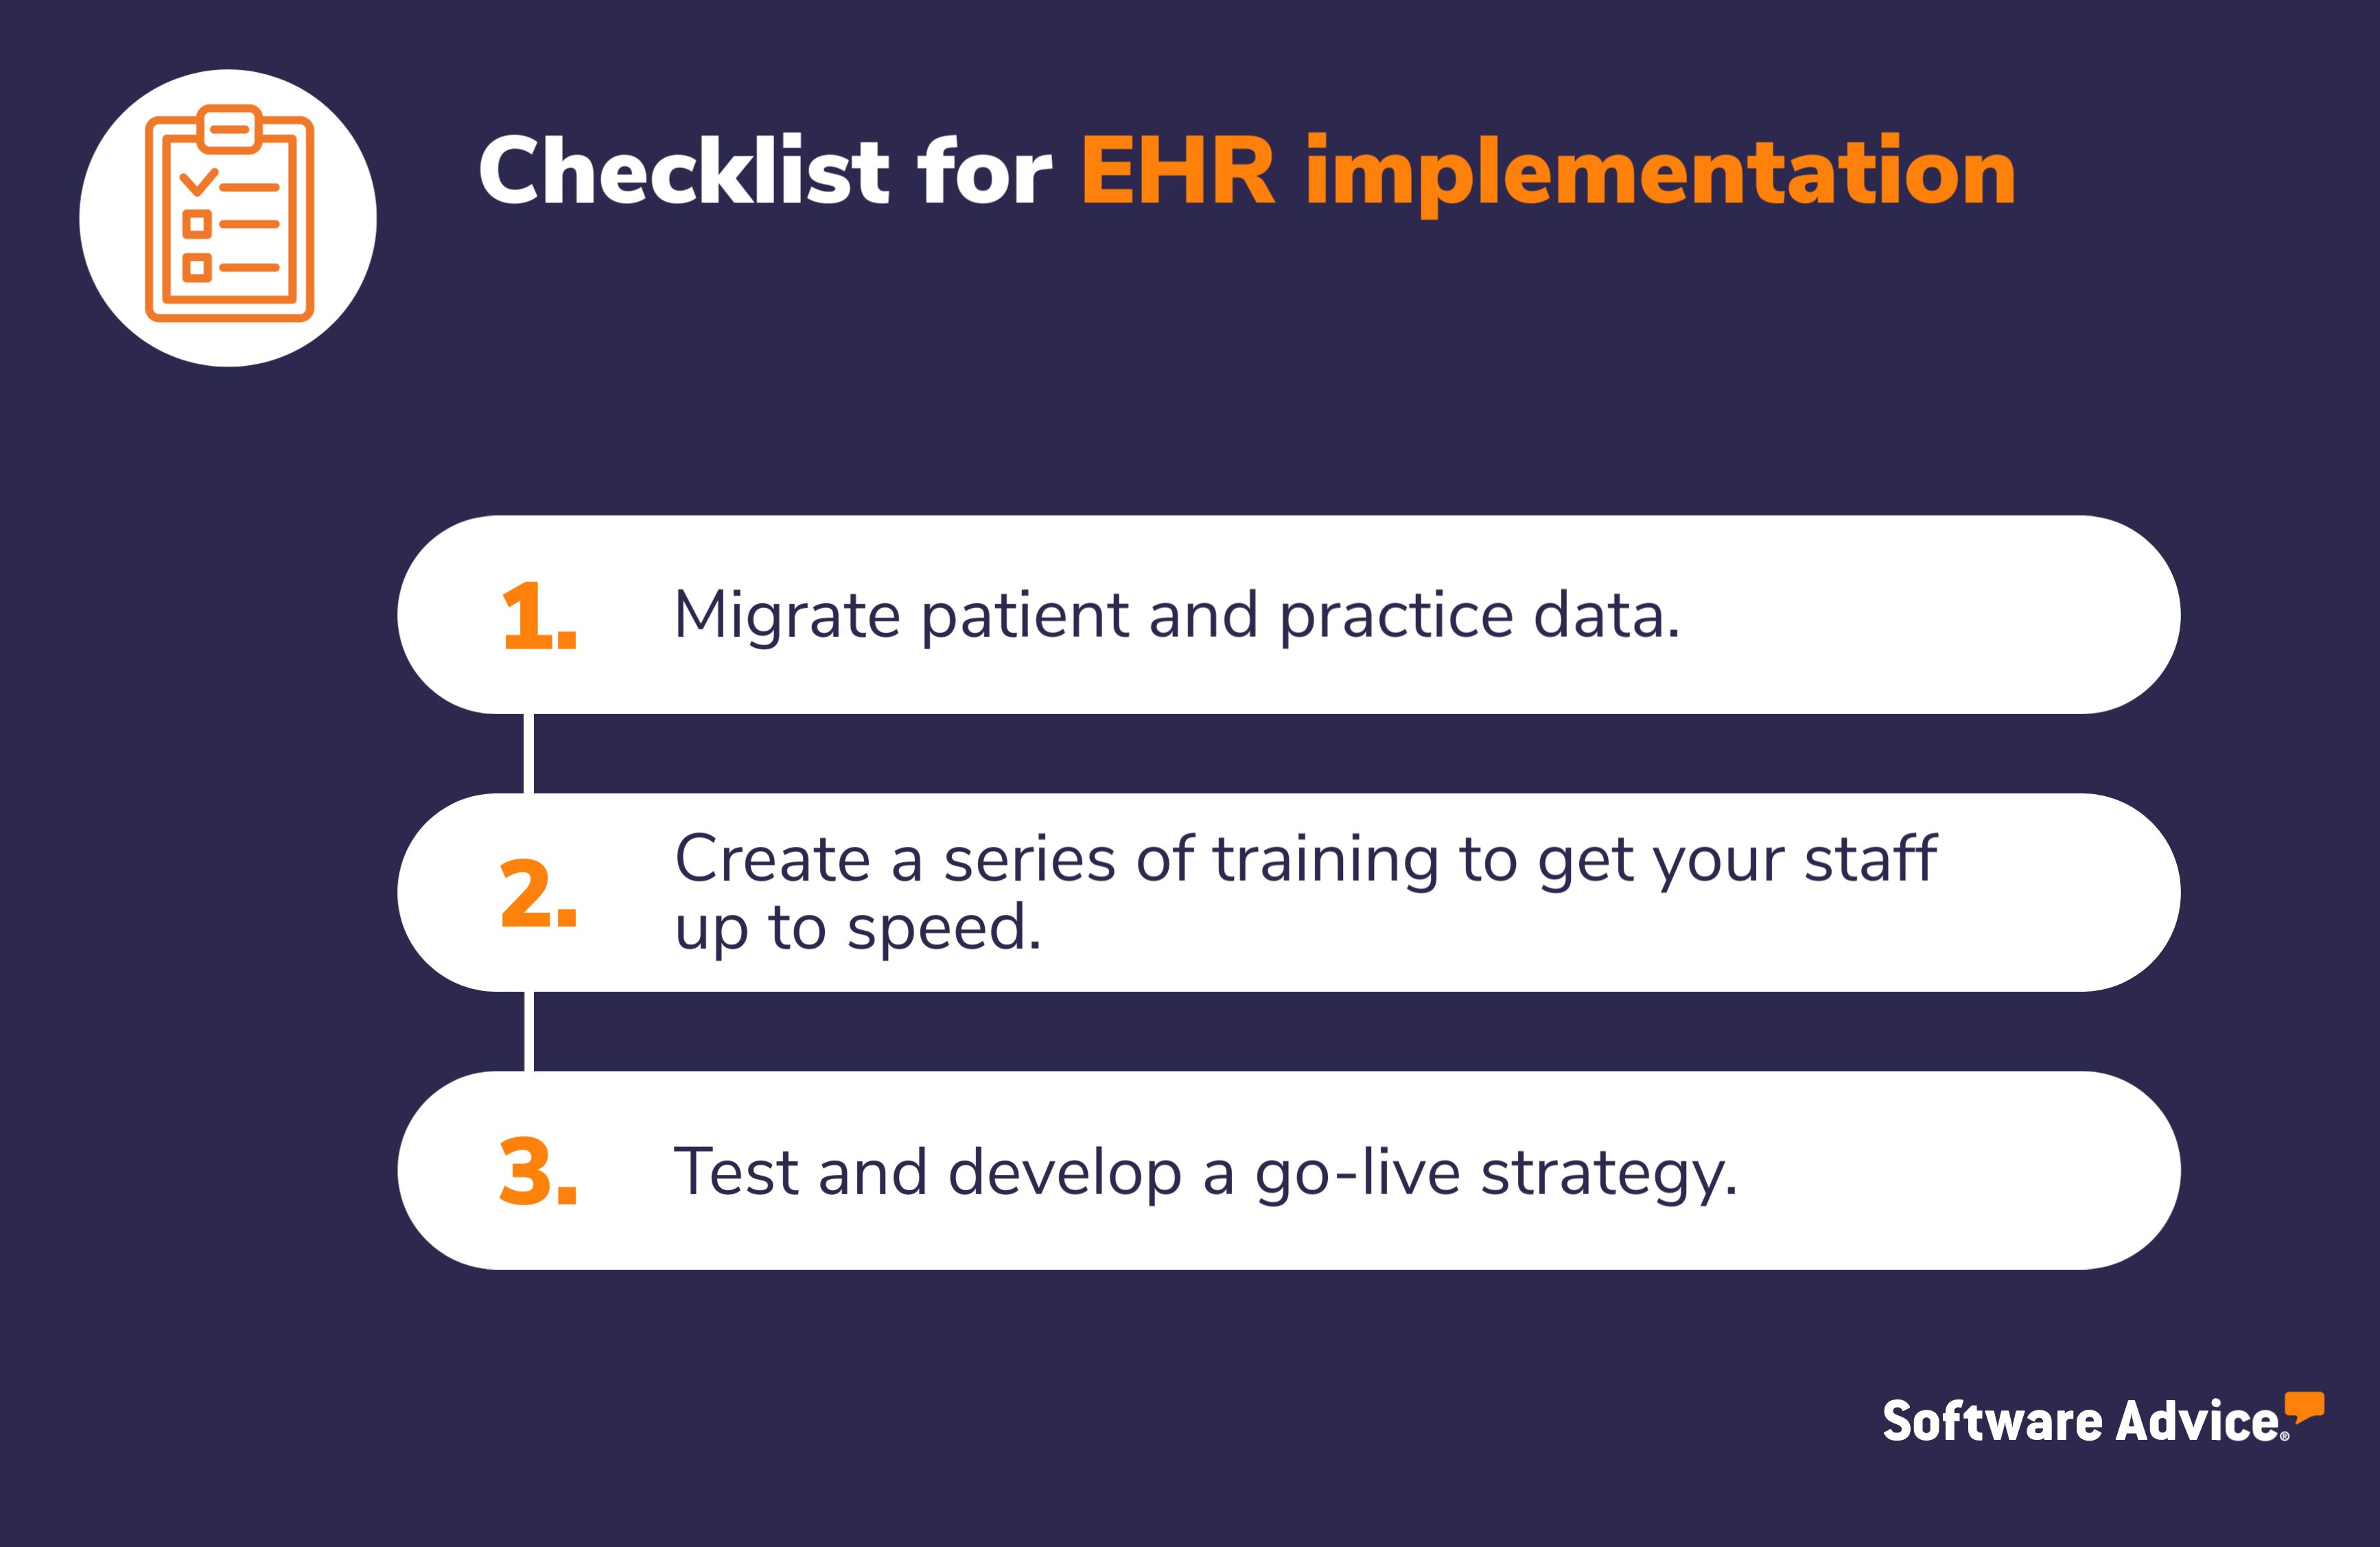 SA graphic showing checklist for EHR implementation